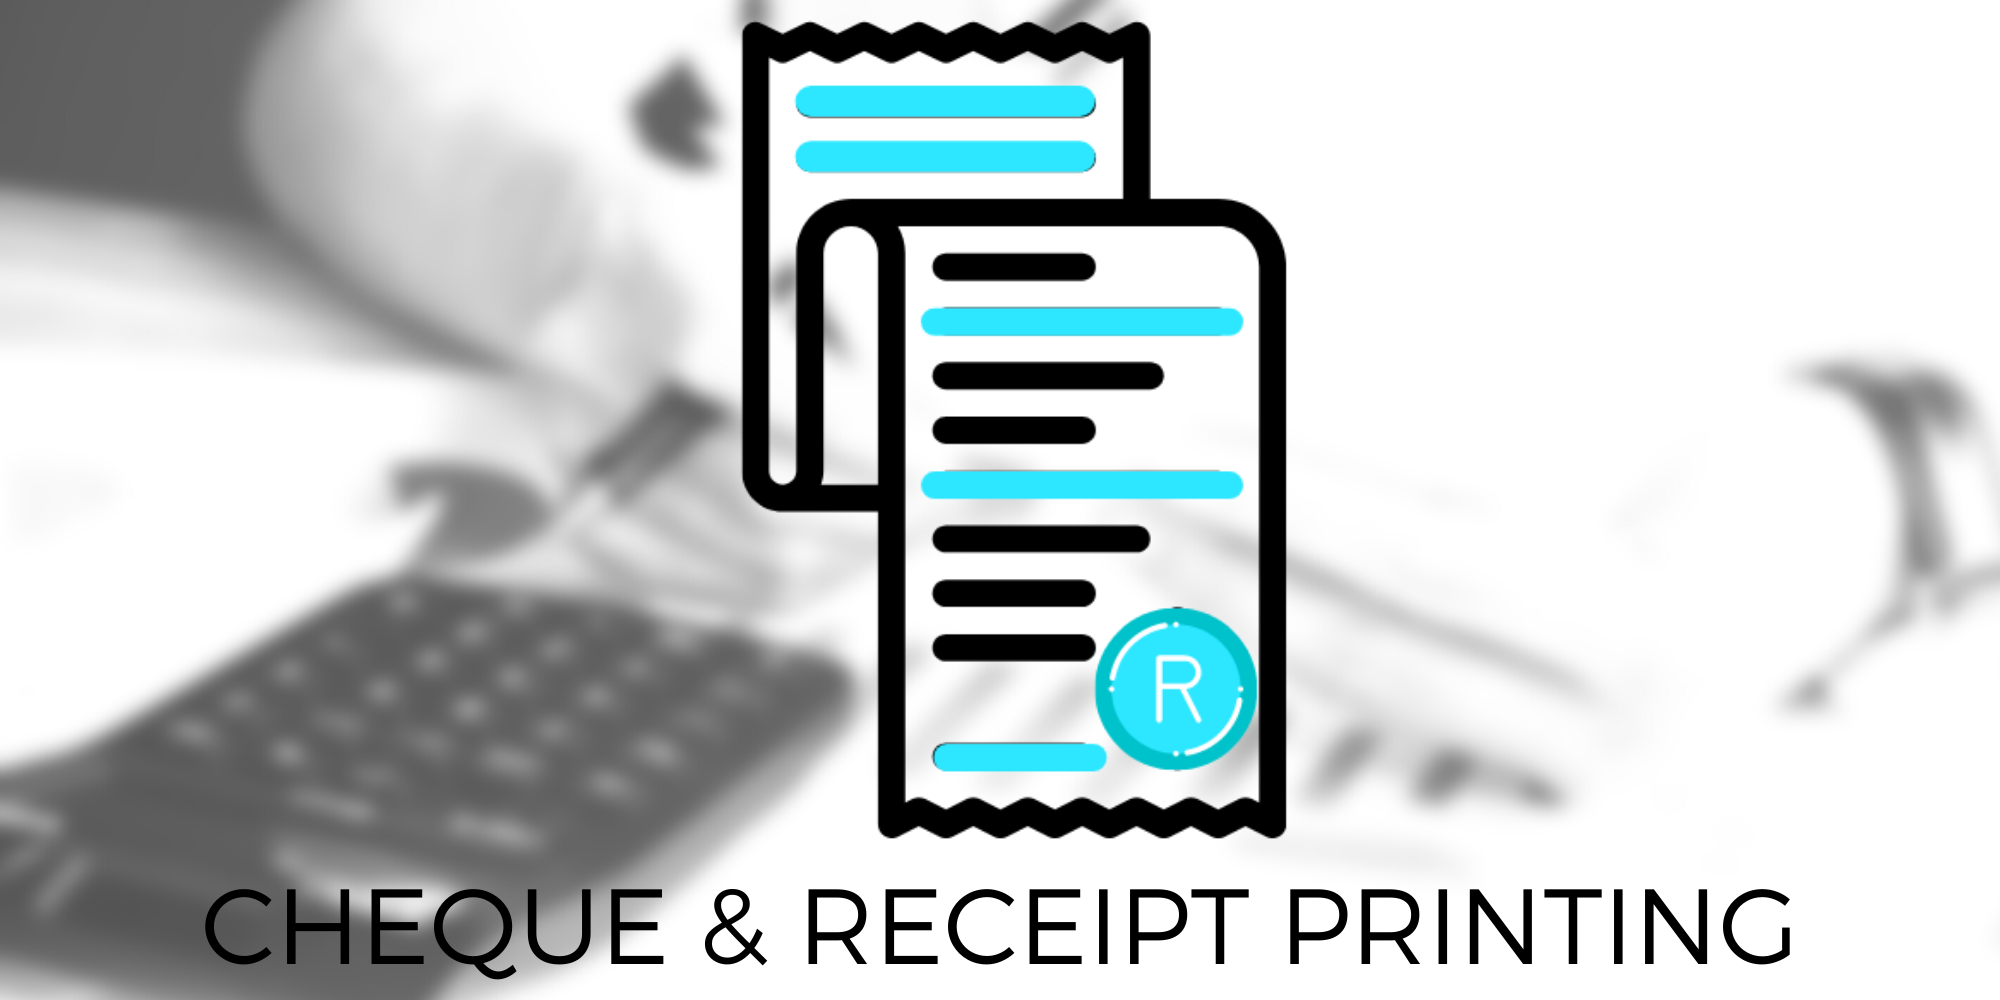 Cheque and Receipt Printing